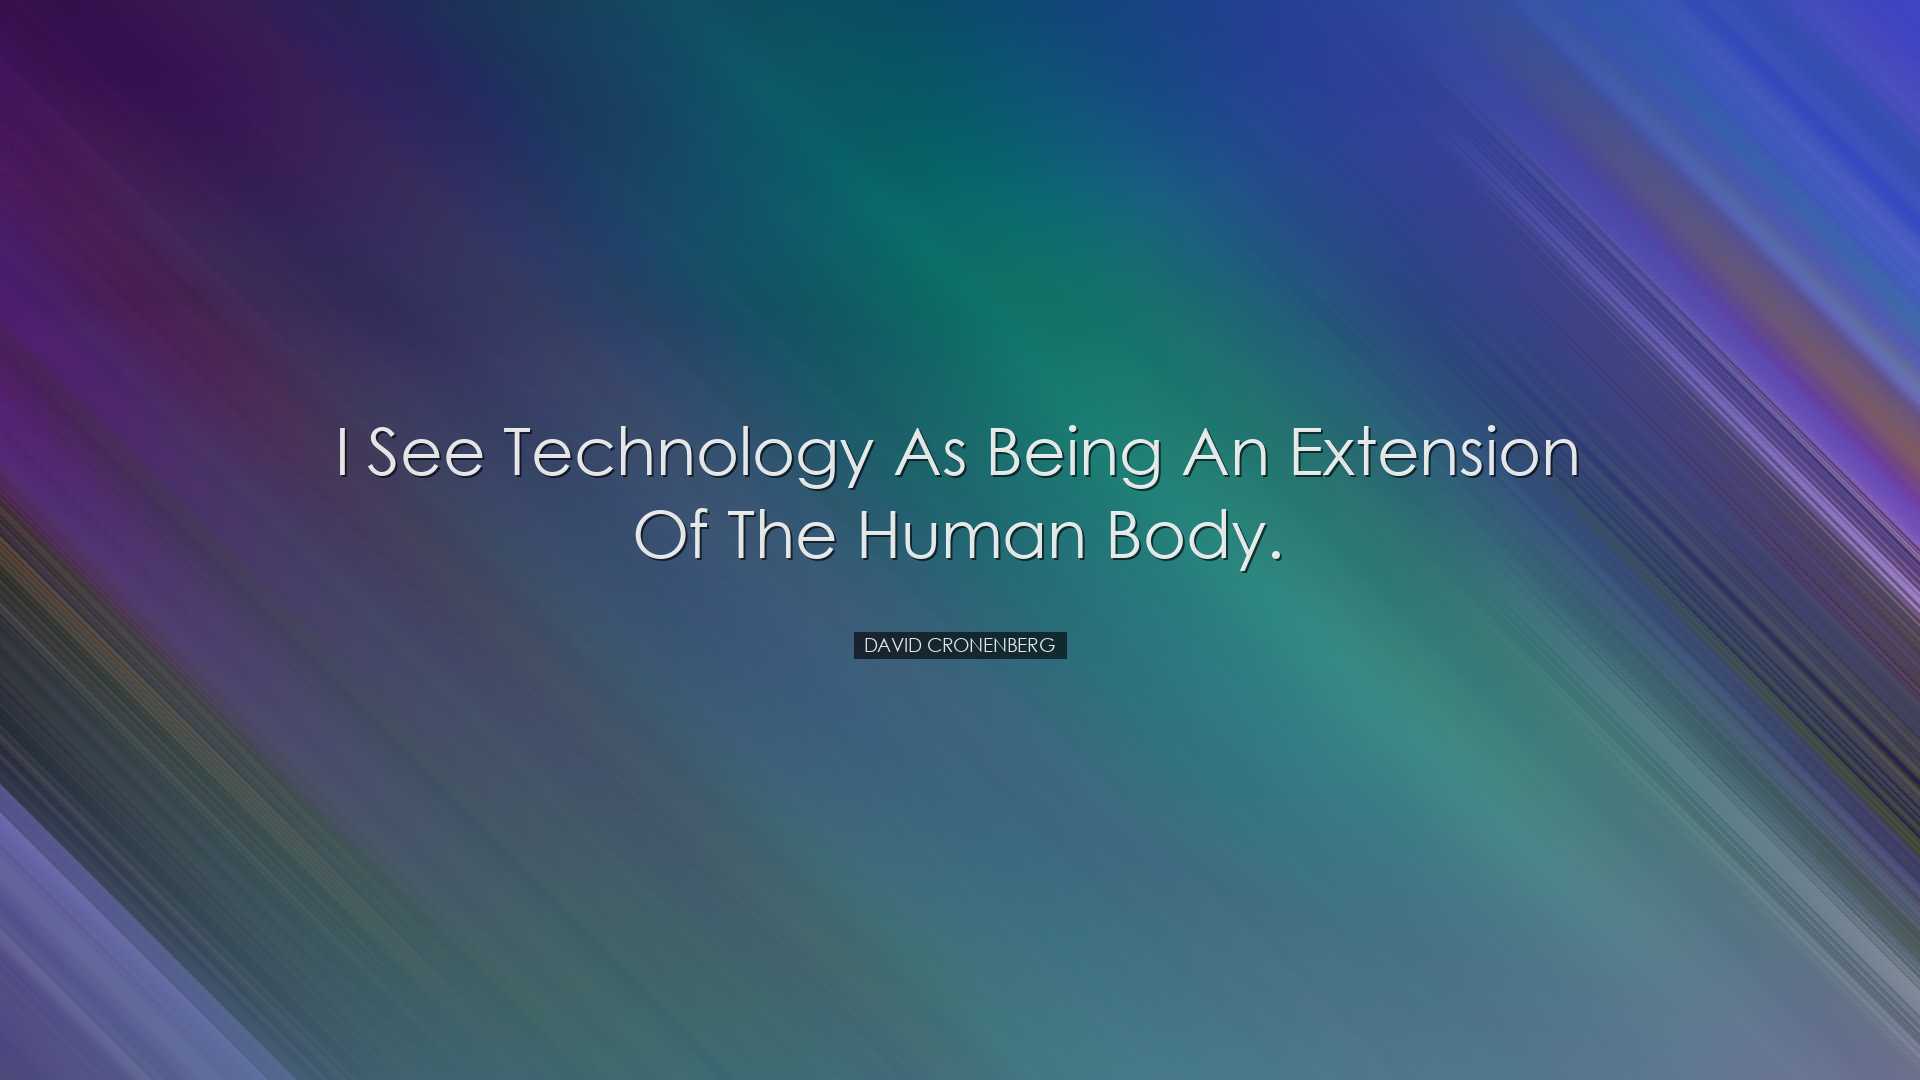 I see technology as being an extension of the human body. - David